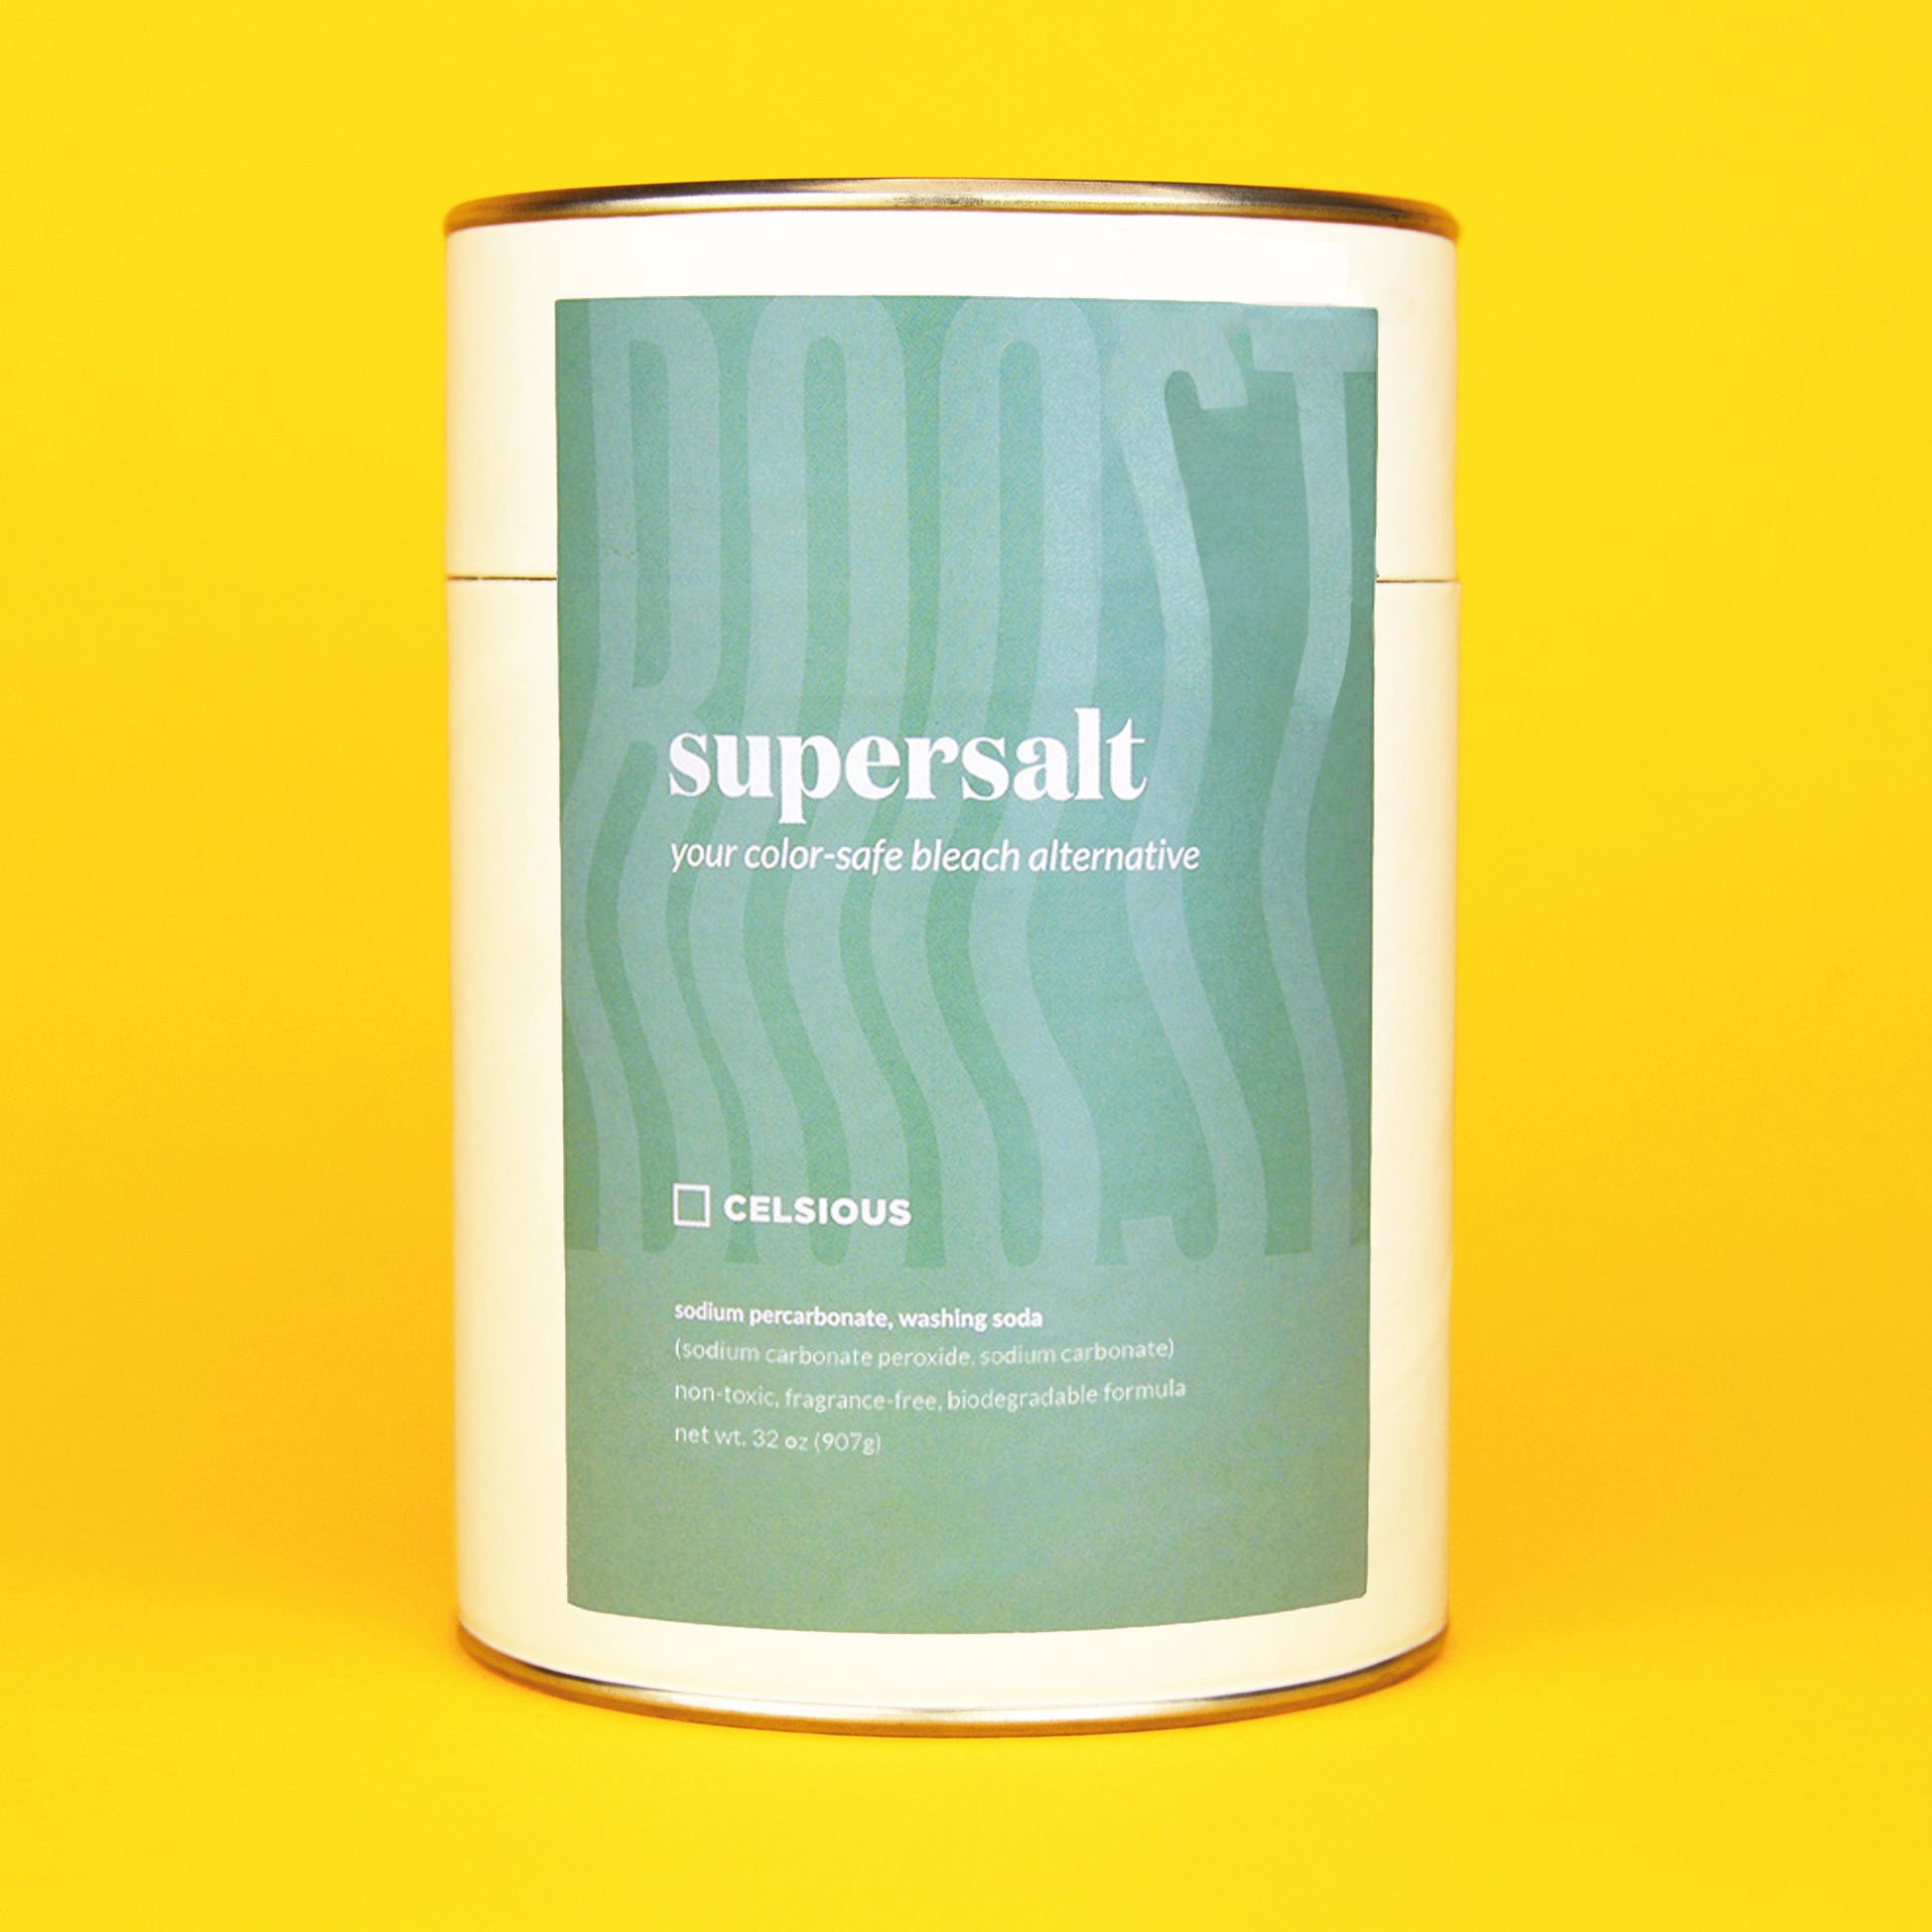 A white canister of Supersalt oxygen booster with a seafoam green label, photographed on a yellow backdrop